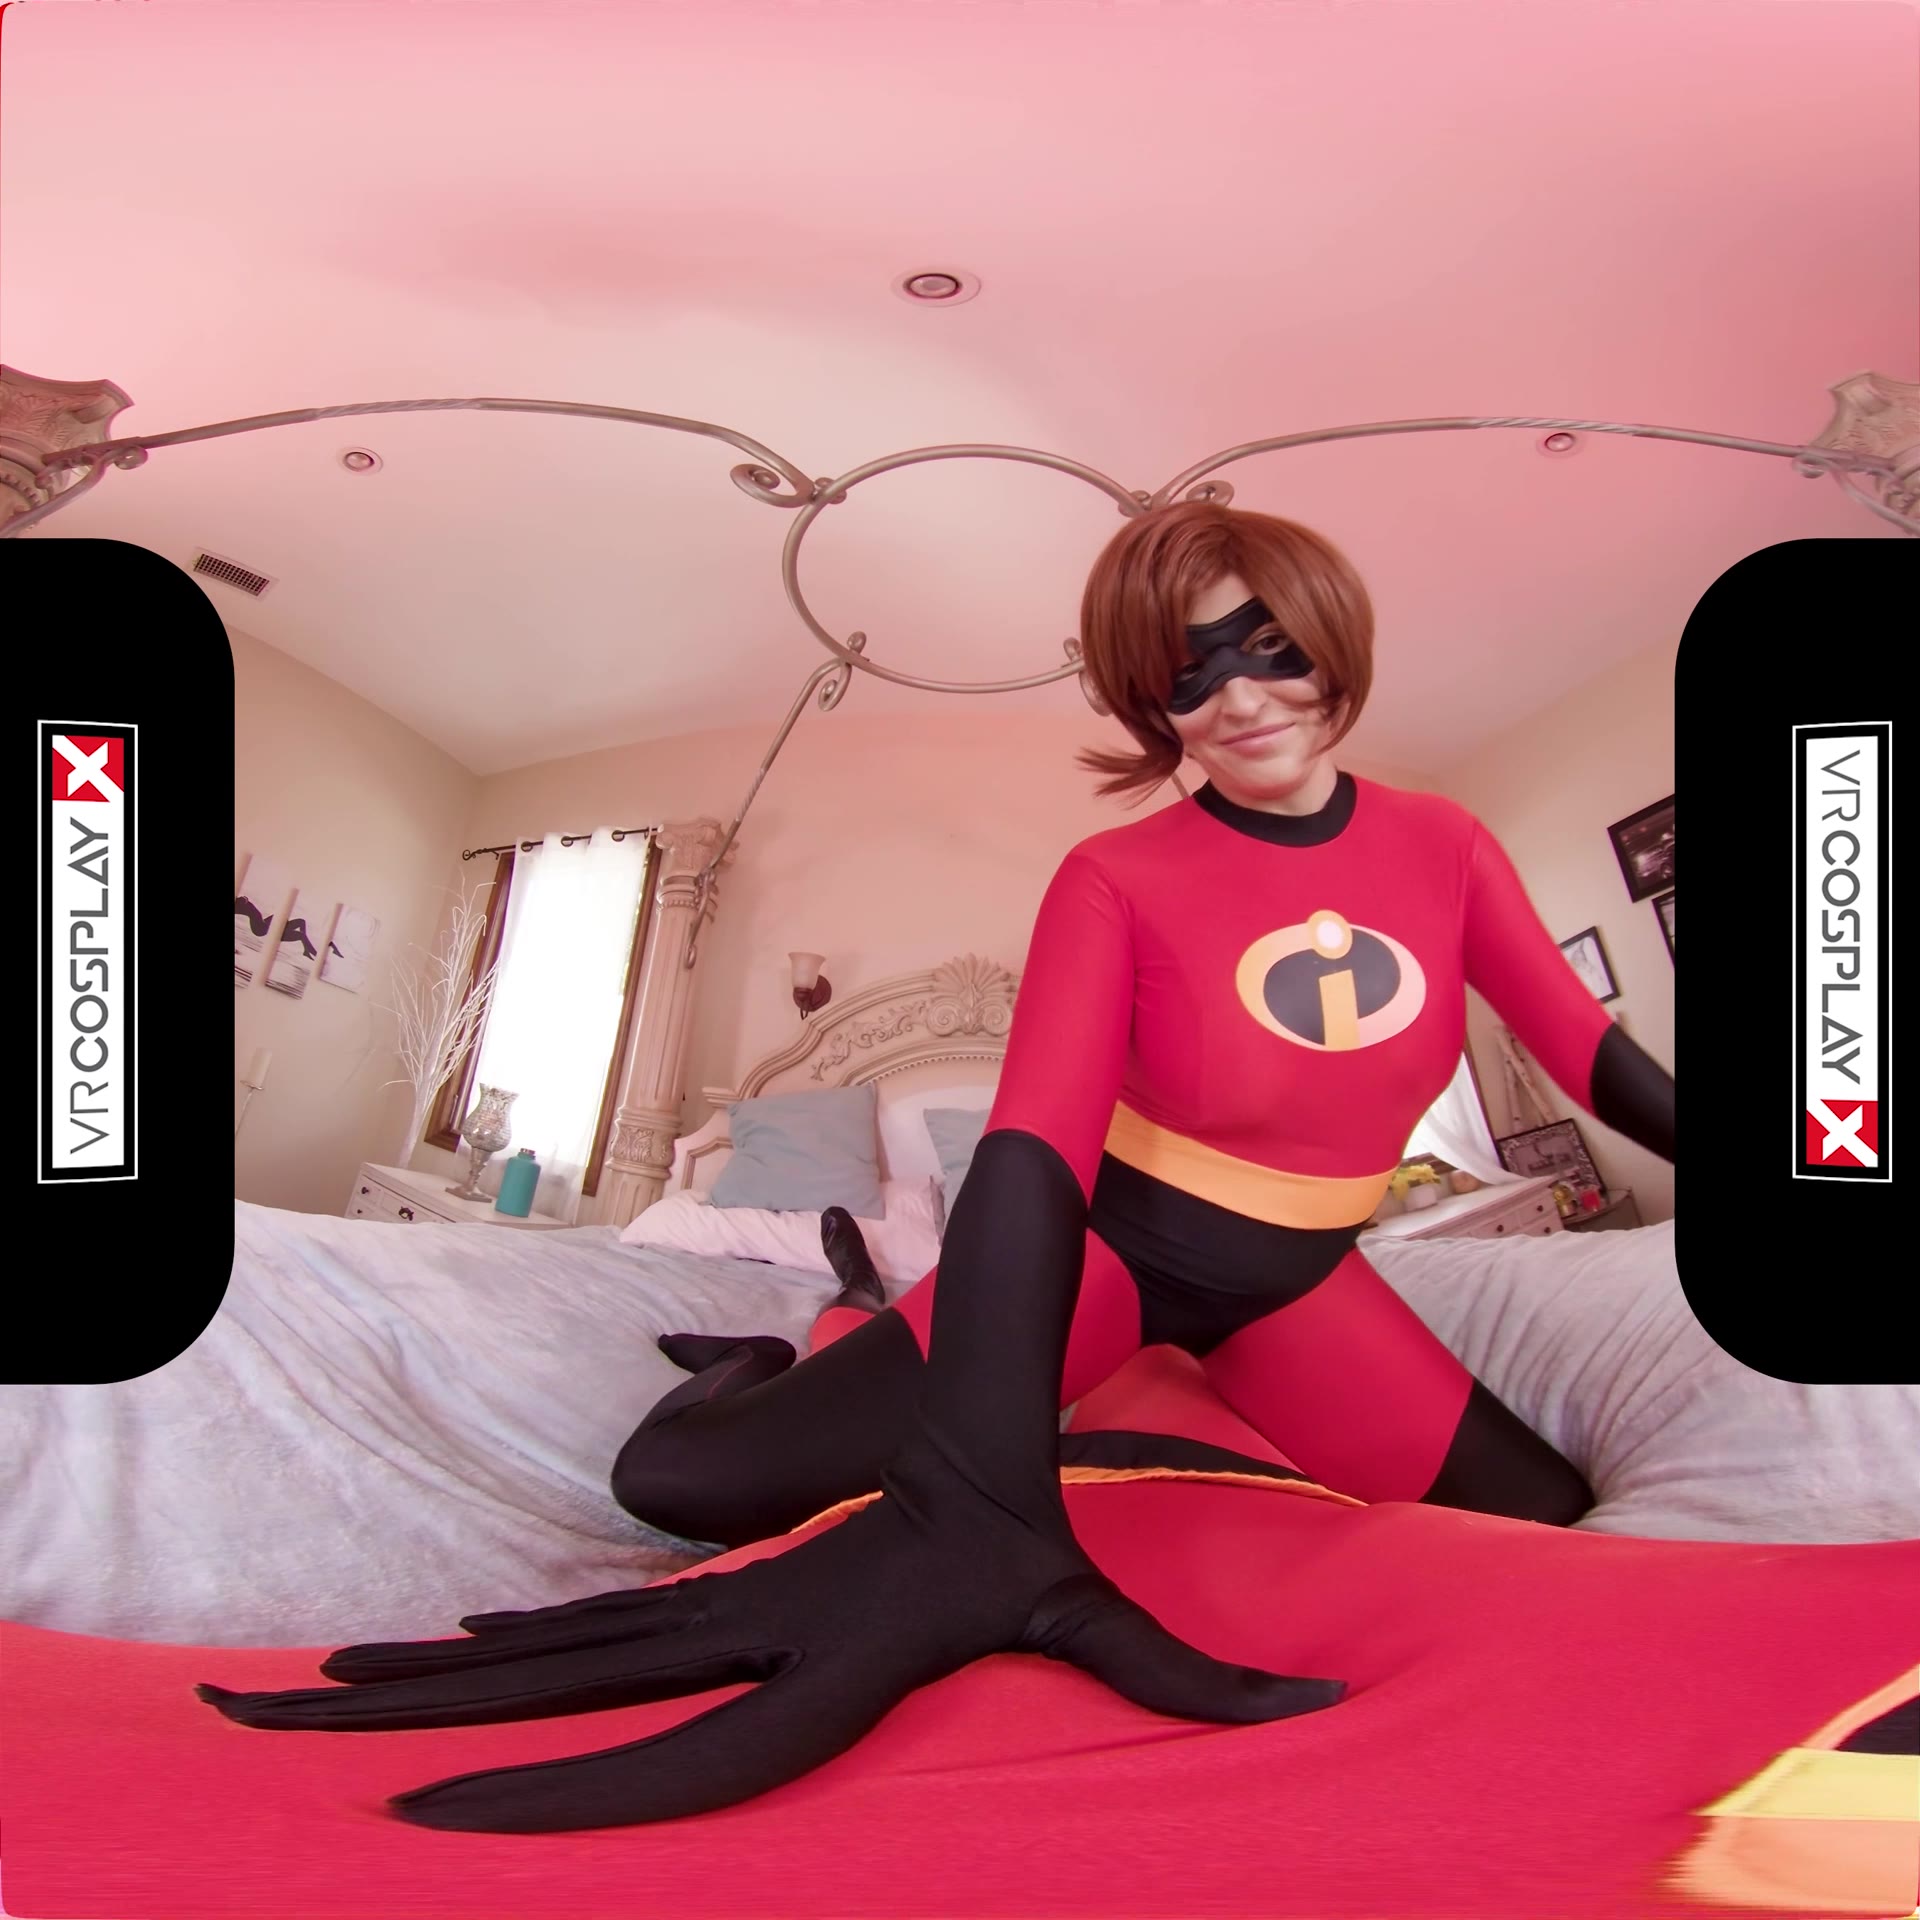 Incredibles Porn X - Incredibles, The: A XXX Parody | VRCosplayX | Adult DVD Empire